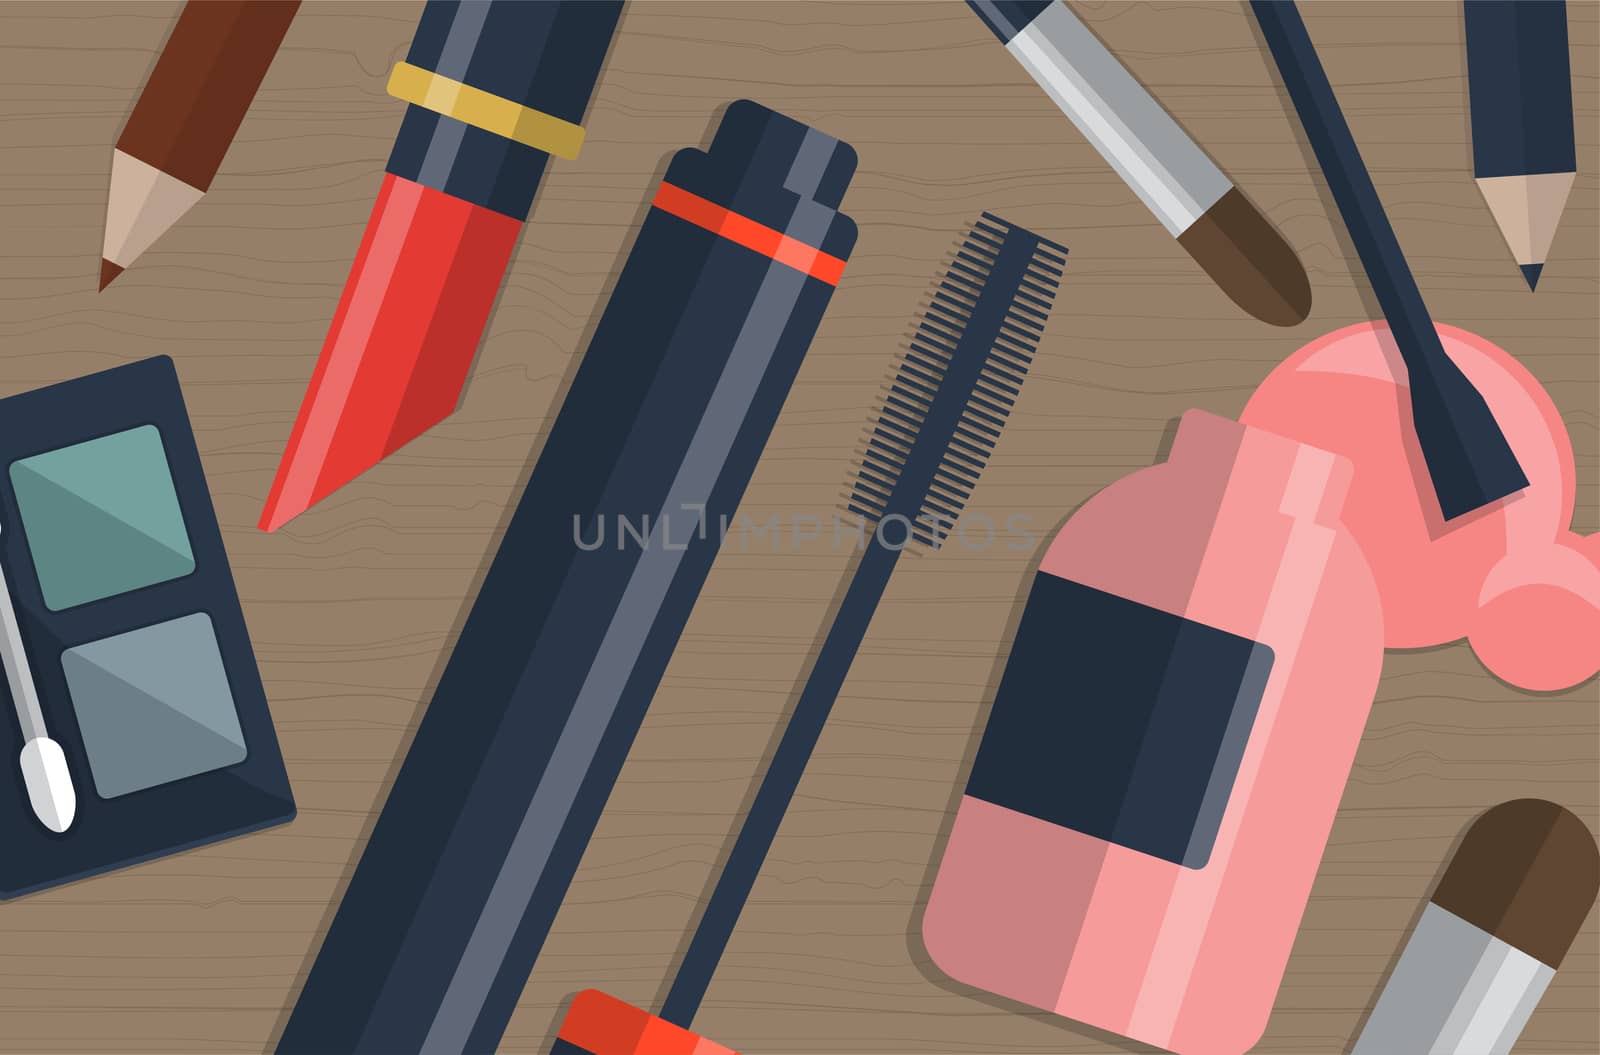 Set of female cosmetics on a table with place for your text. illustration